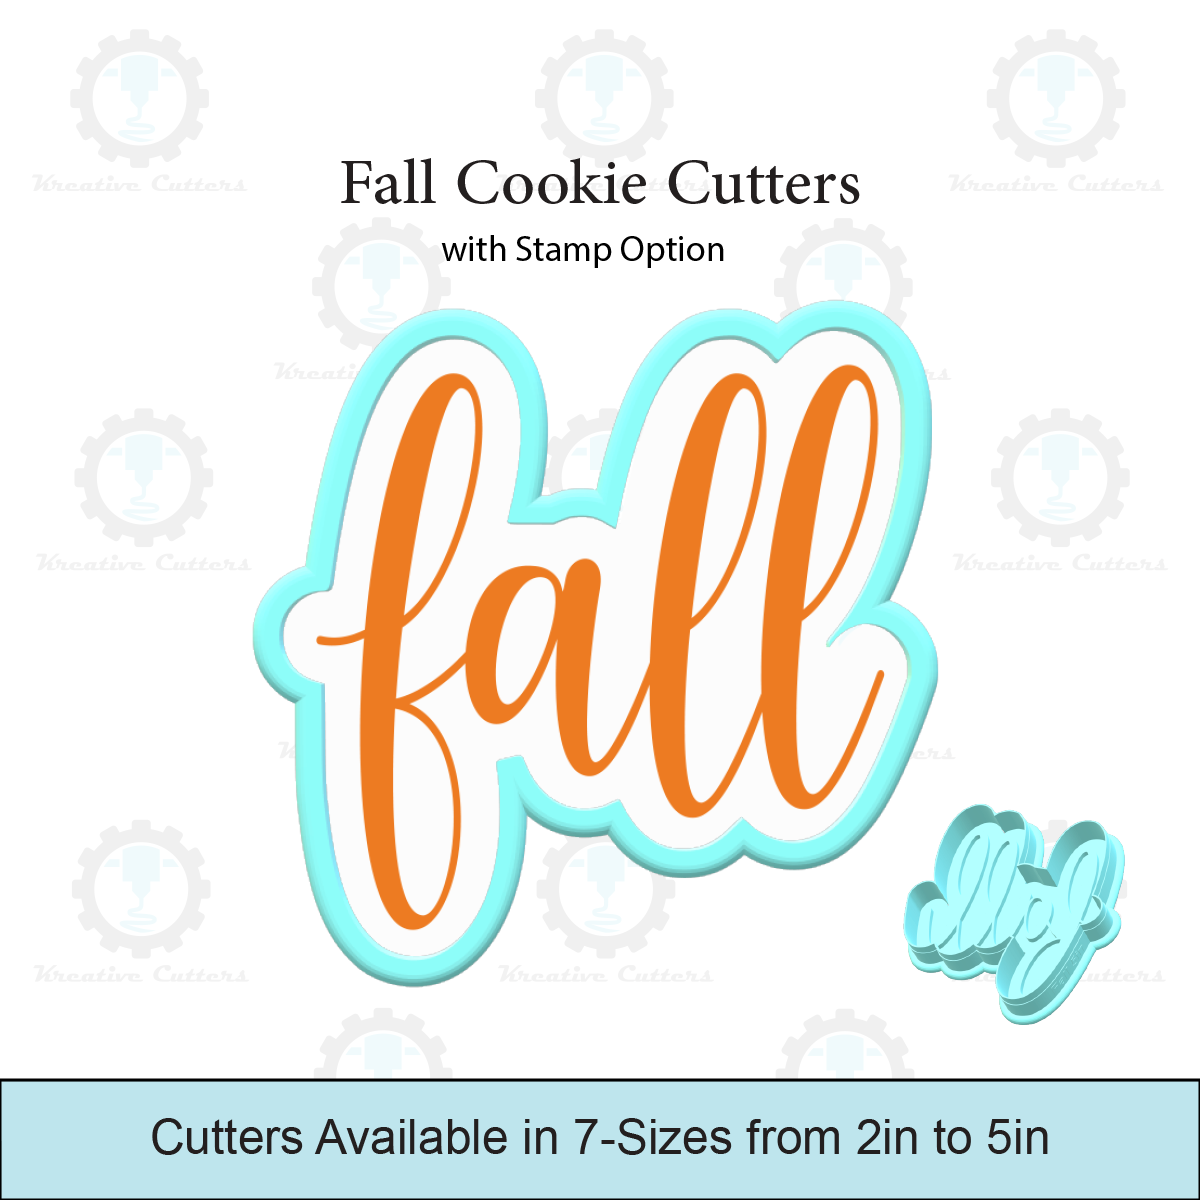 Fall Cookie Cutter with Stamp Option